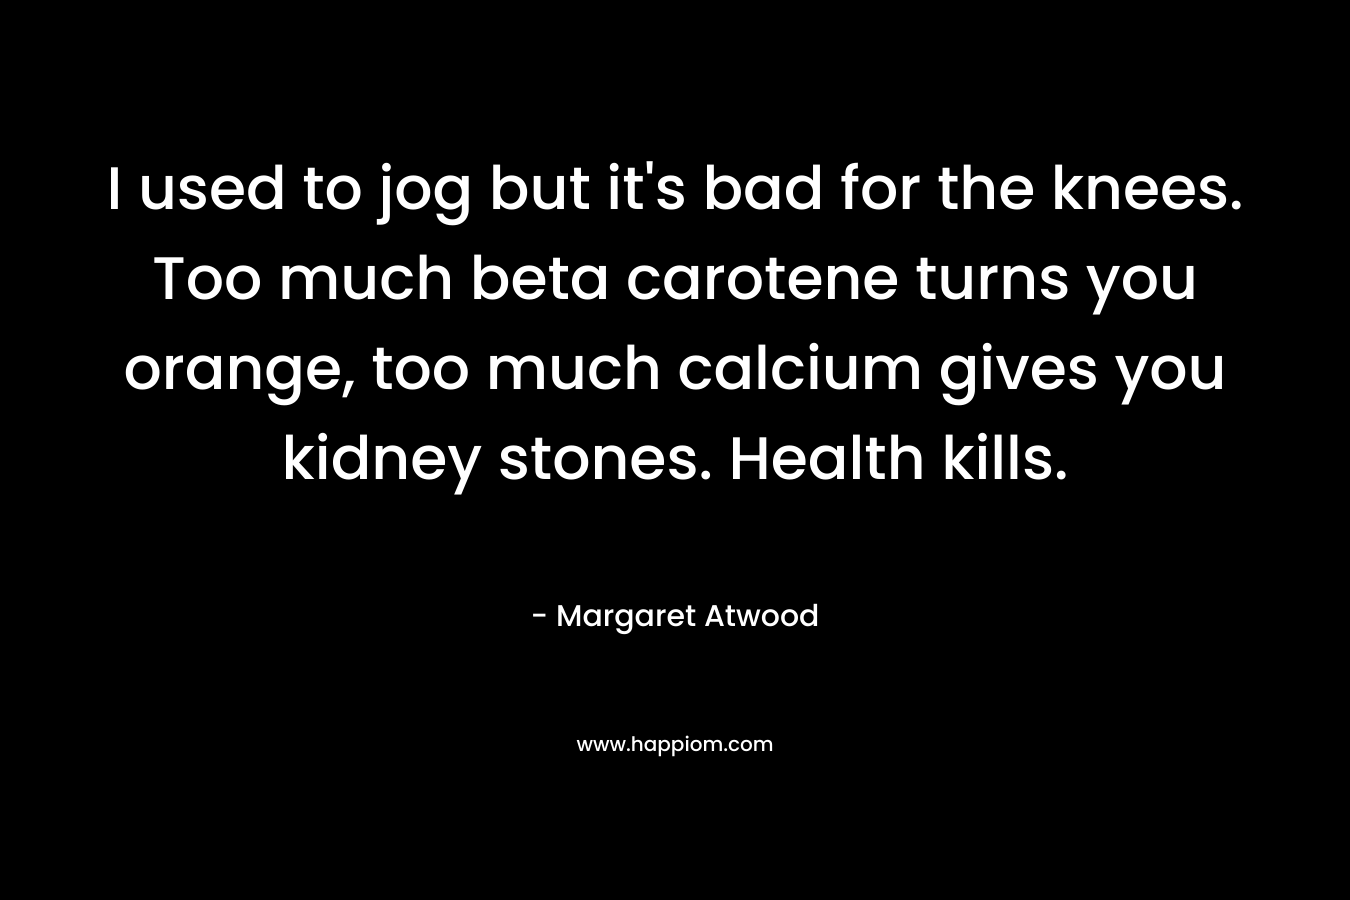 I used to jog but it’s bad for the knees. Too much beta carotene turns you orange, too much calcium gives you kidney stones. Health kills. – Margaret Atwood